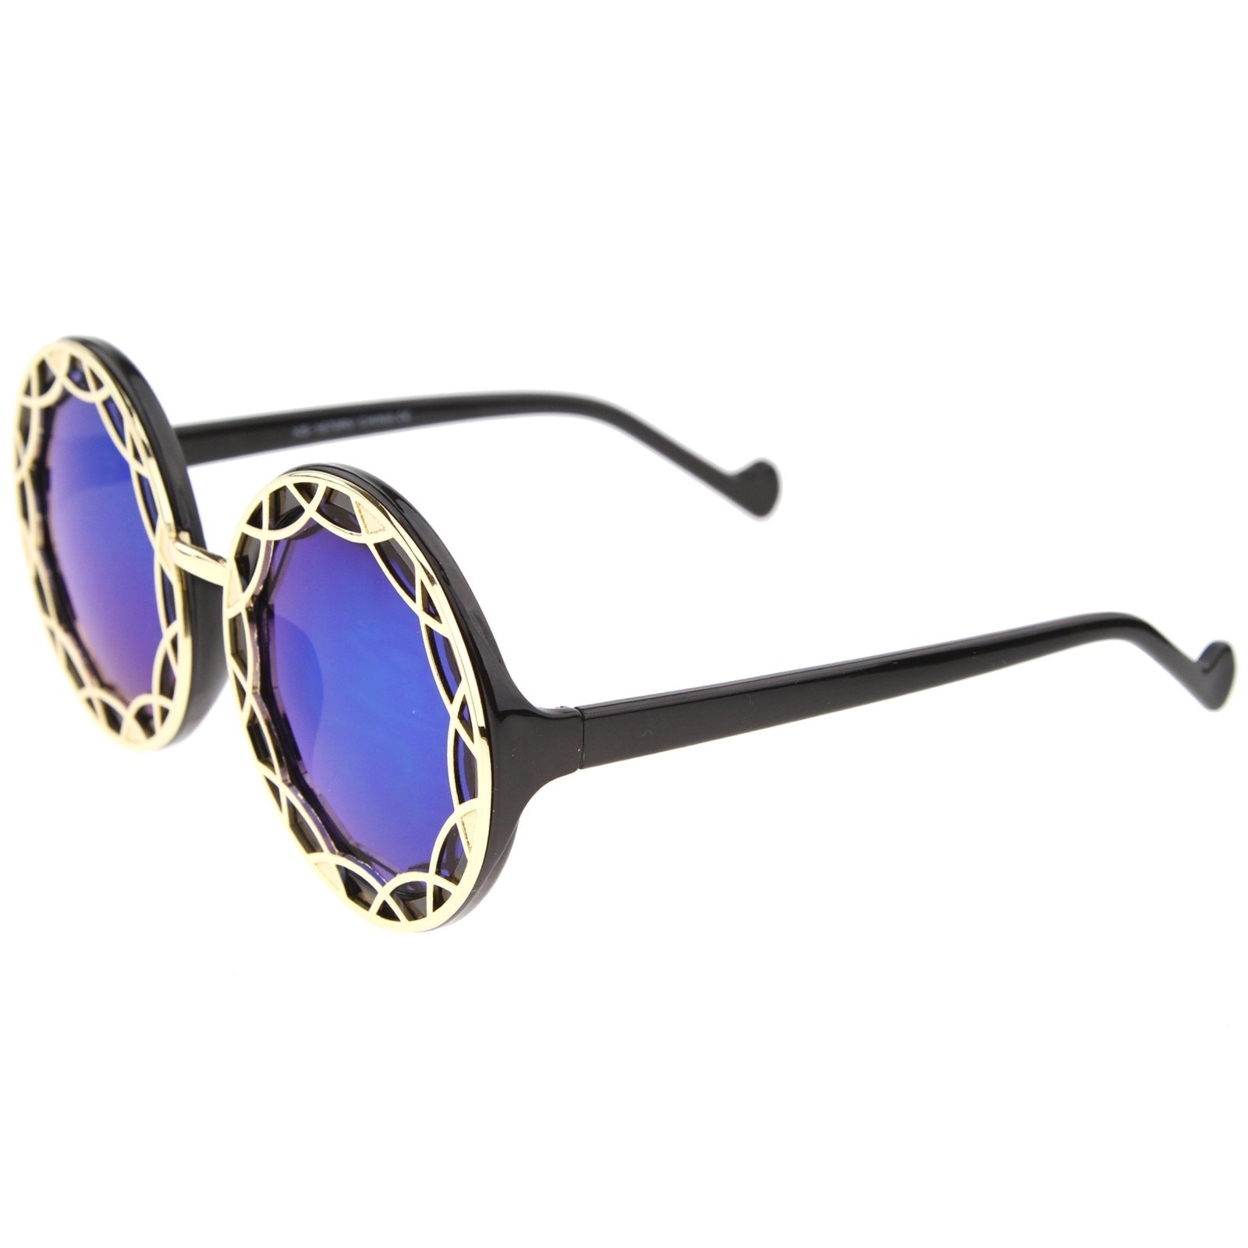 Women's Oversize Ornate Flat Pattern Color Mirror Lens Round Sunglasses 55mm - White-Gold / Blue Mirror